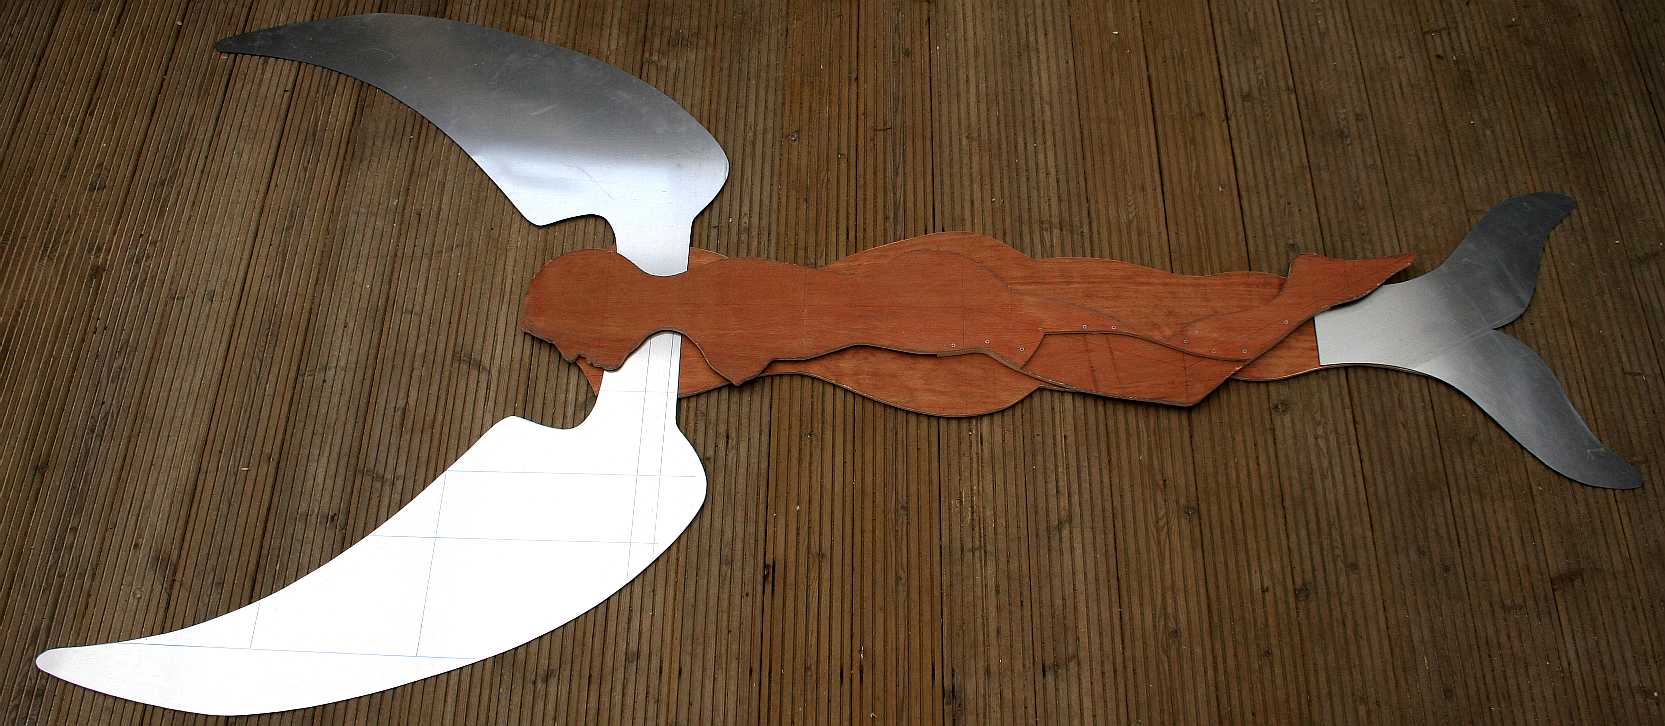 The aluminium wings and tail are cut from sheet metal to complete the set. Now begins the job of joining them all together. Plywood is made by bonding thin layers of wood together with the grain alternating in direction with each layer. By this means a flat board can be made that is very strong. Copyright  photograph.